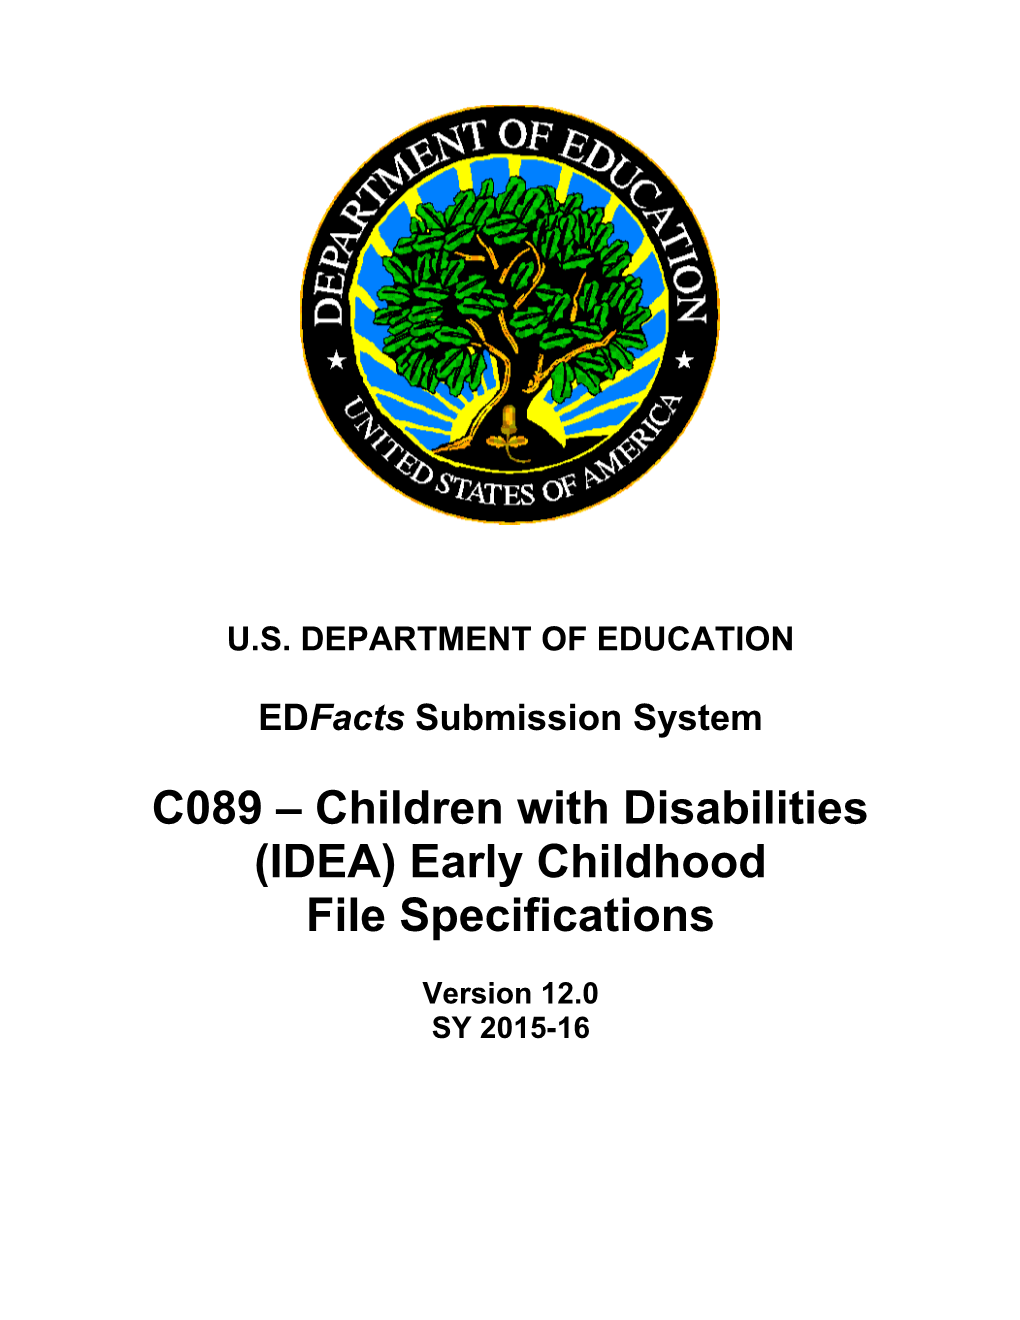 Children with Disabilities (IDEA) Early Childhood File Specifications